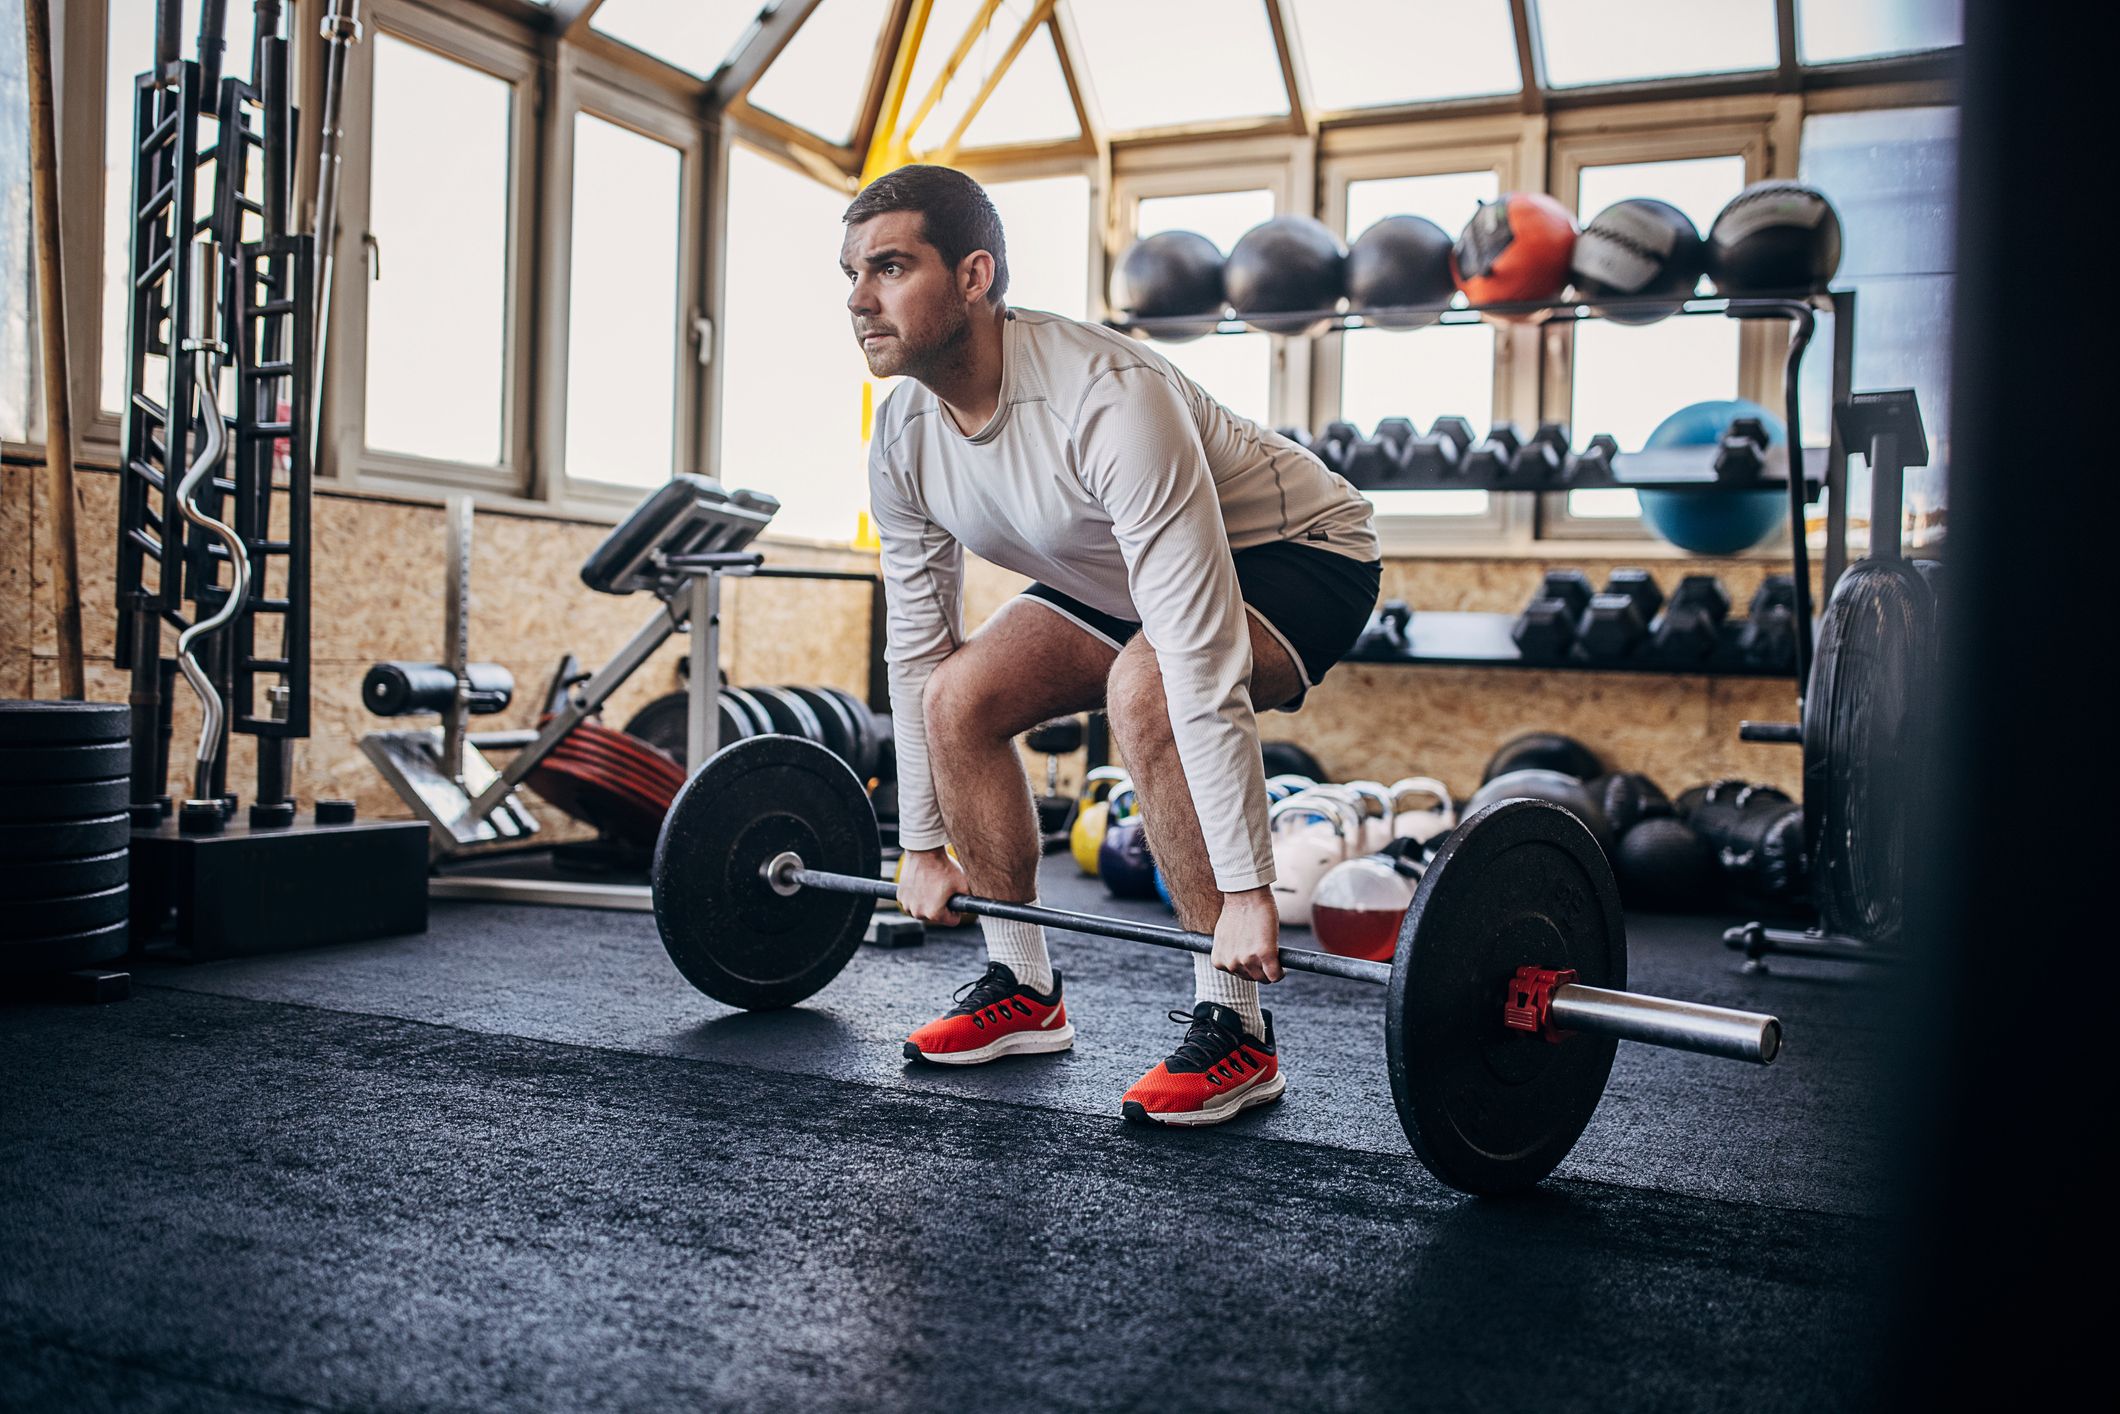 The Principles of Strength Training for New Clients - NASM - NASM